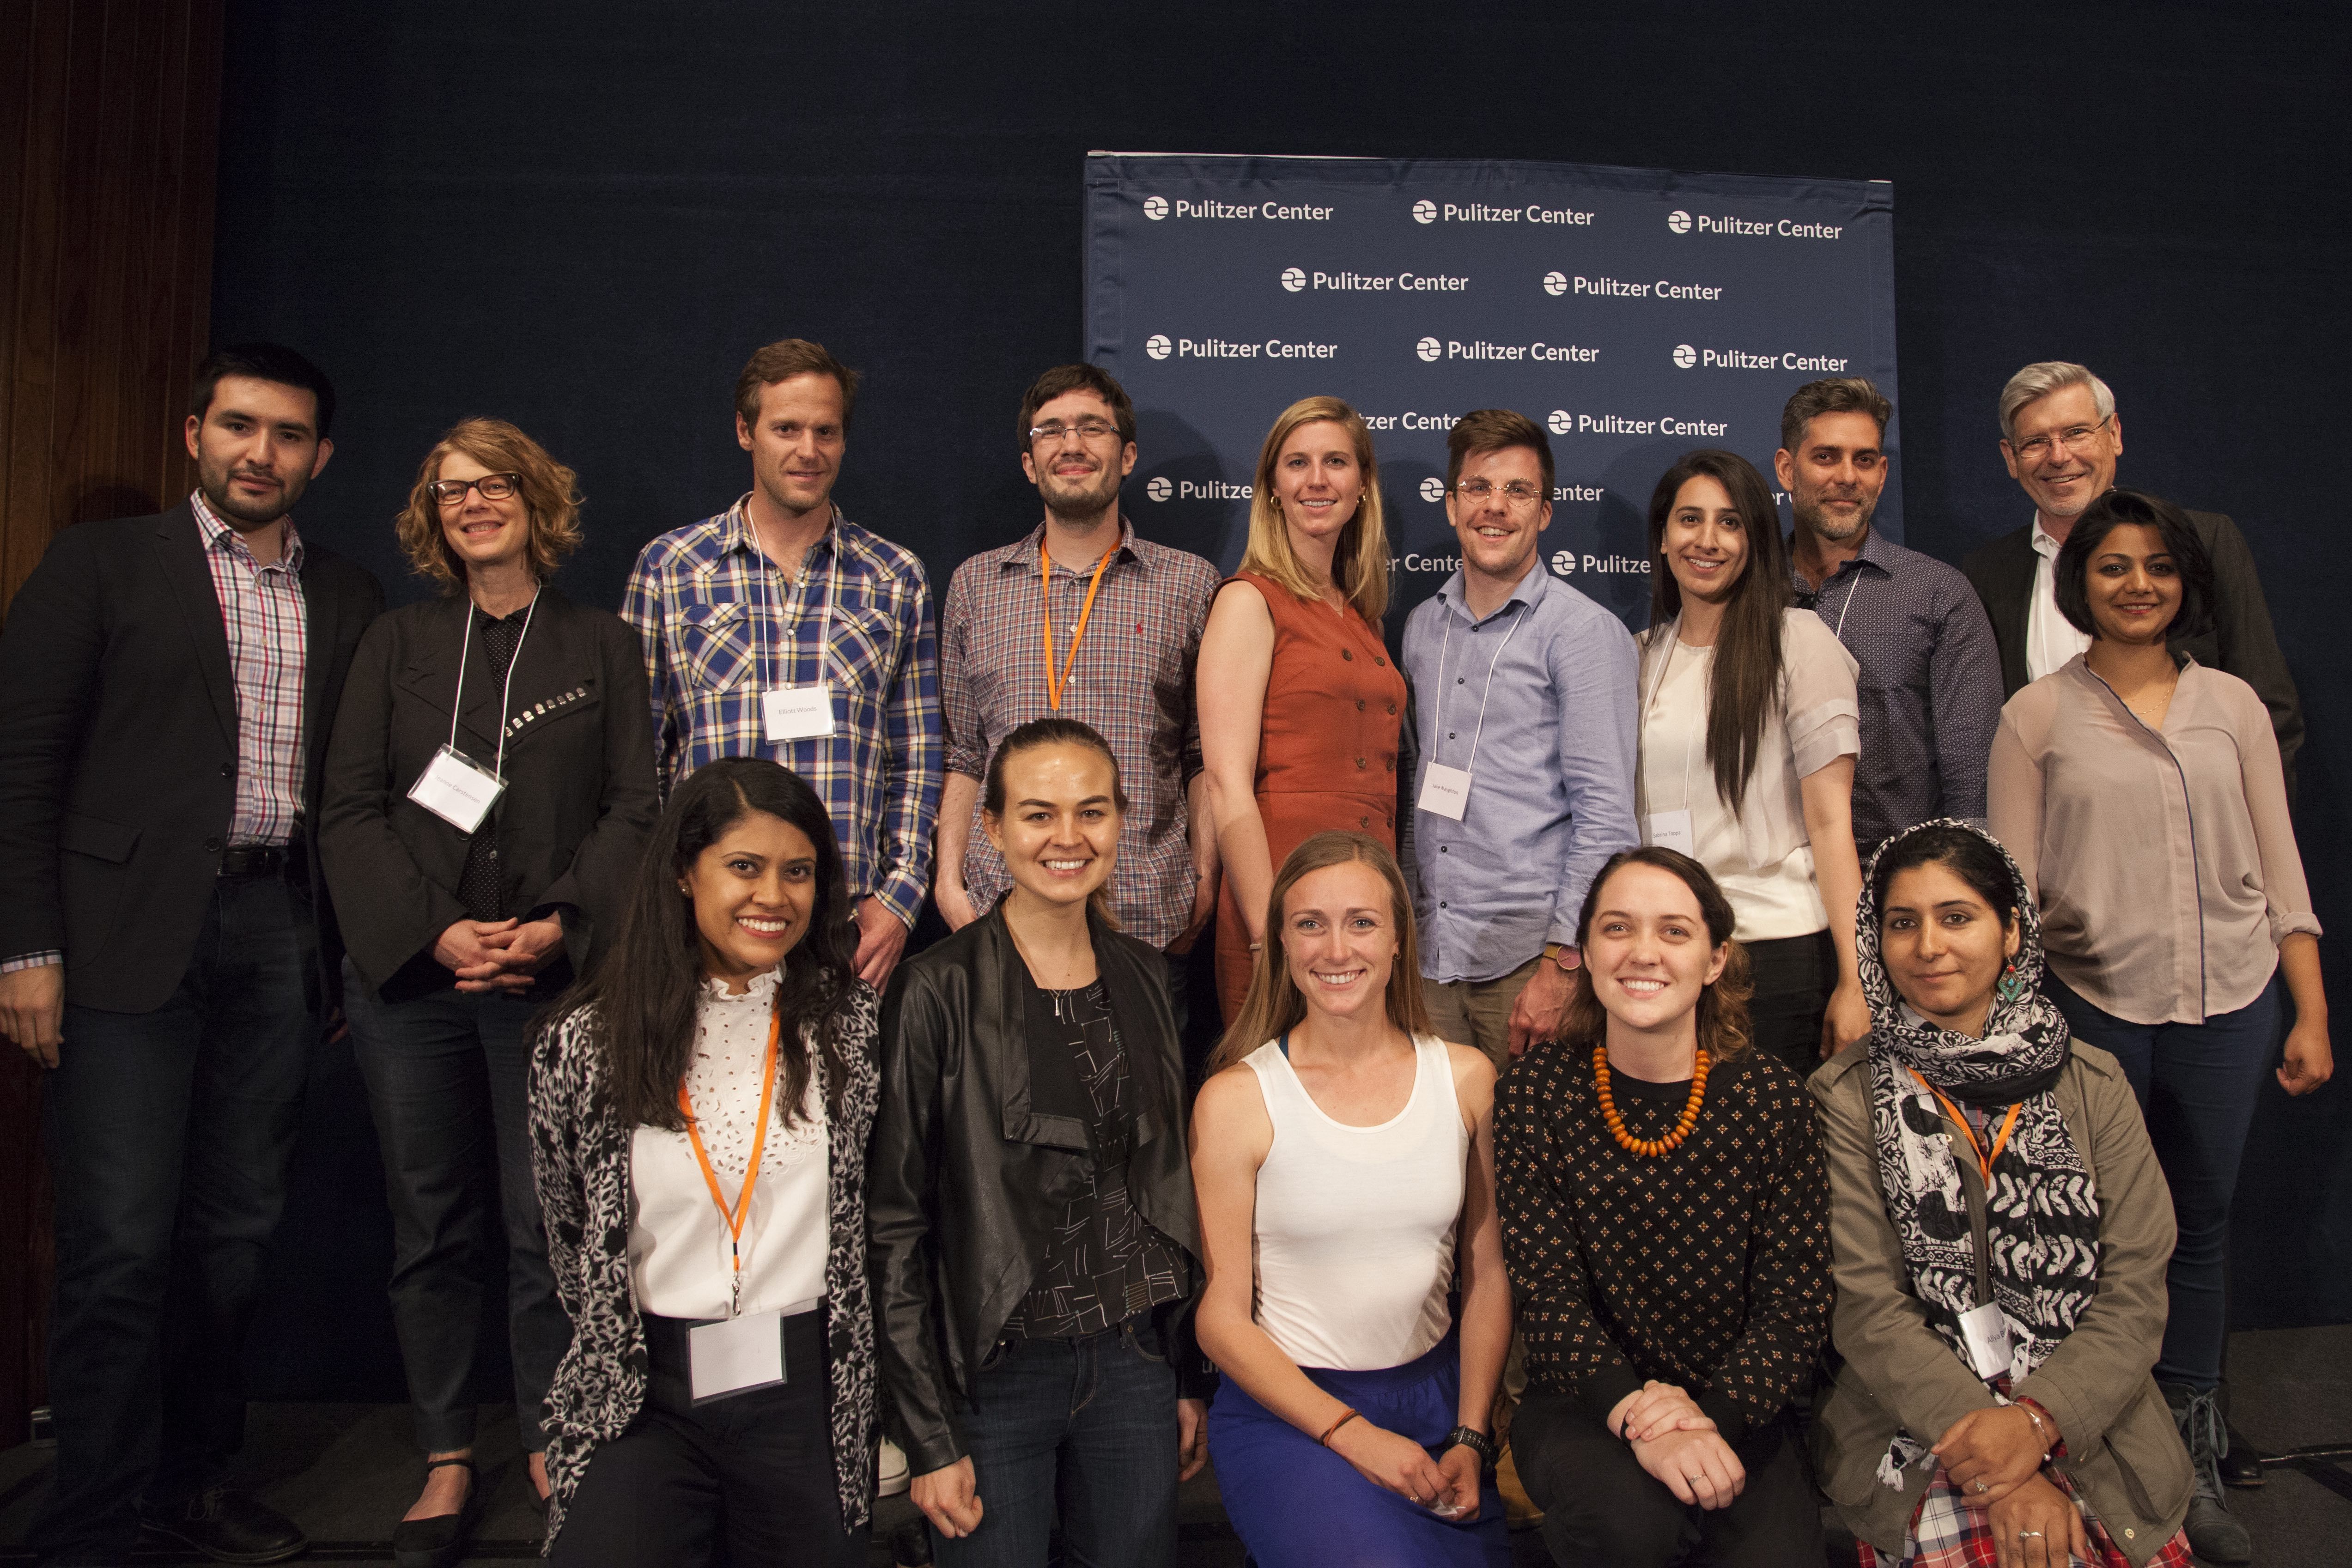 Freelancers who are participating in a Pulitzer Center-supported five-day hostile environment and first-aid training course beginning June 4, 2017, pose together at the Pulitzer Center Gender Lens Conference. Image by Jin Ding. United States, 2017.